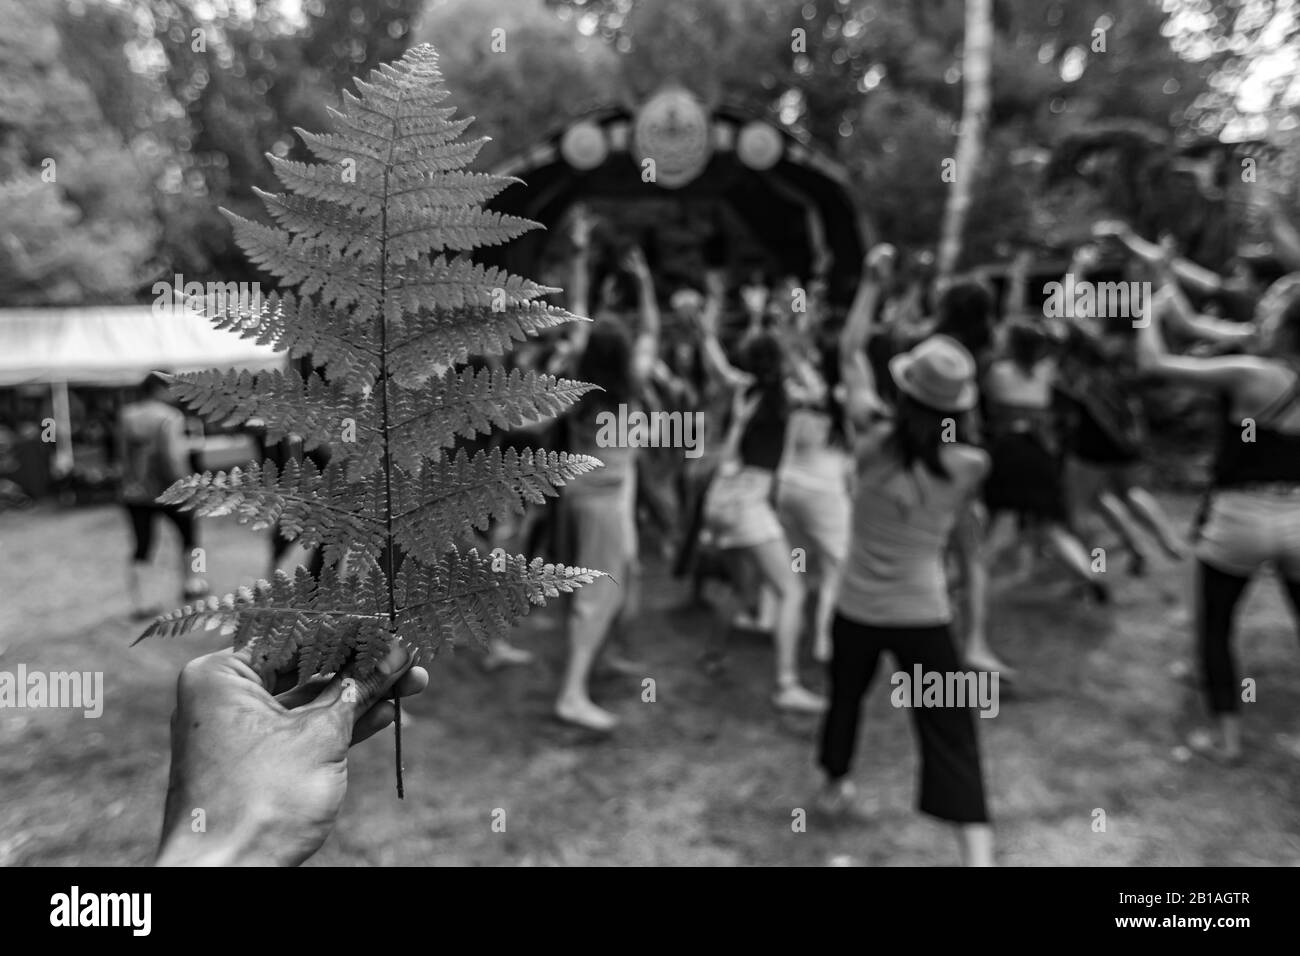 Creative black and white shot in shallow focus, closeup of hand holding foliage from forest as people thank earth and celebrate alternative cultures Stock Photo